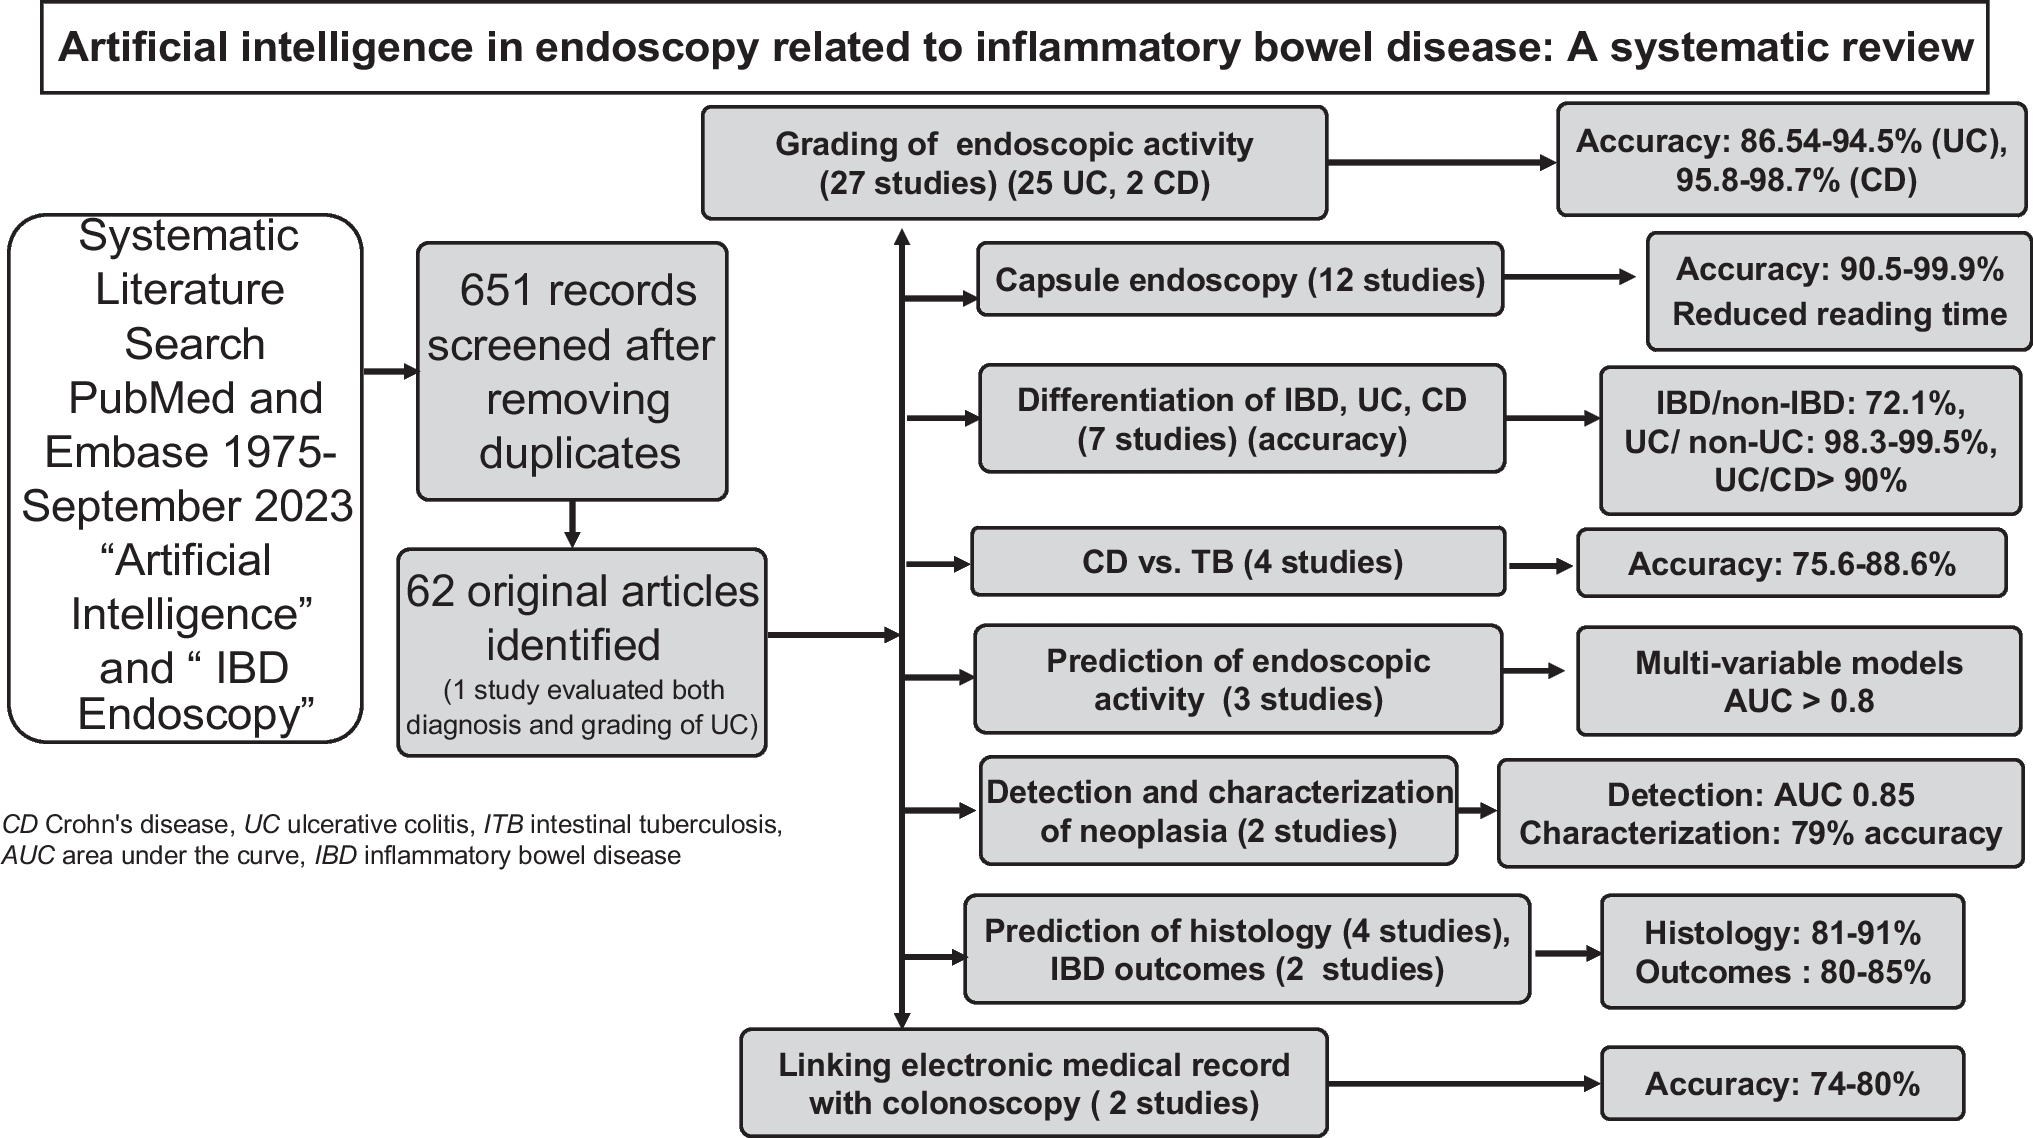 Artificial intelligence in endoscopy related to inflammatory bowel disease: A systematic review